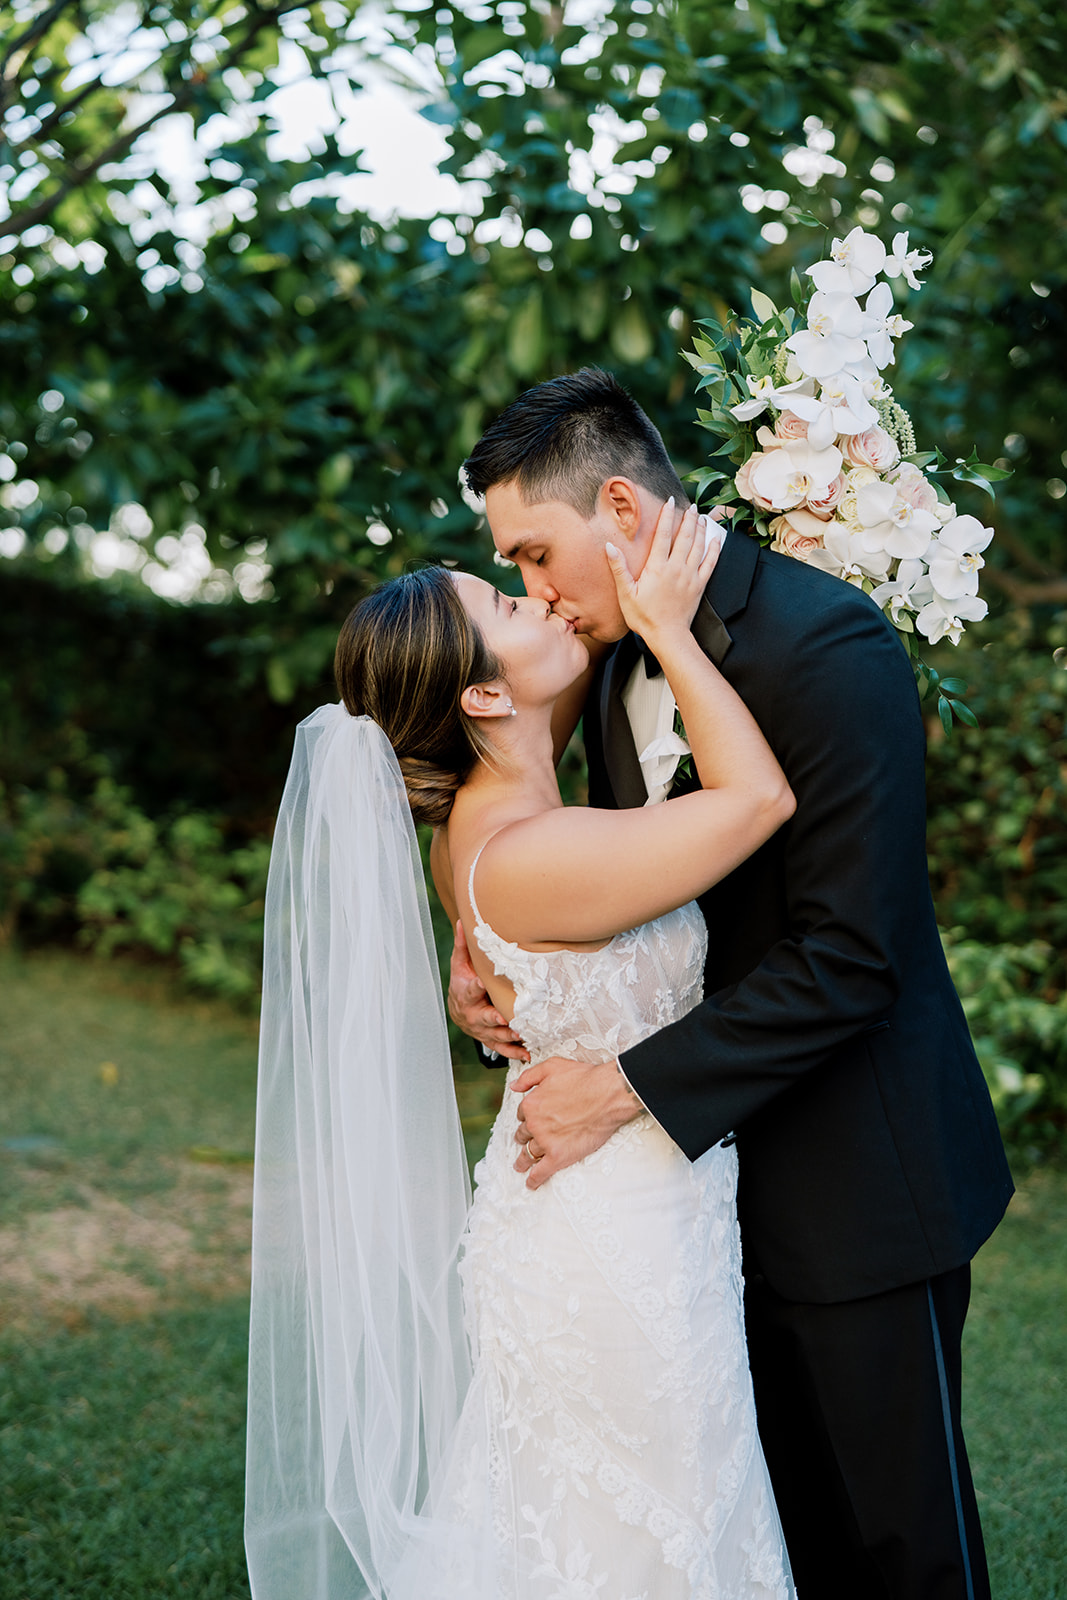 A close up photo of a bride and groom kissing in the garden at The Four Seasons Resort captured by Megan Moura